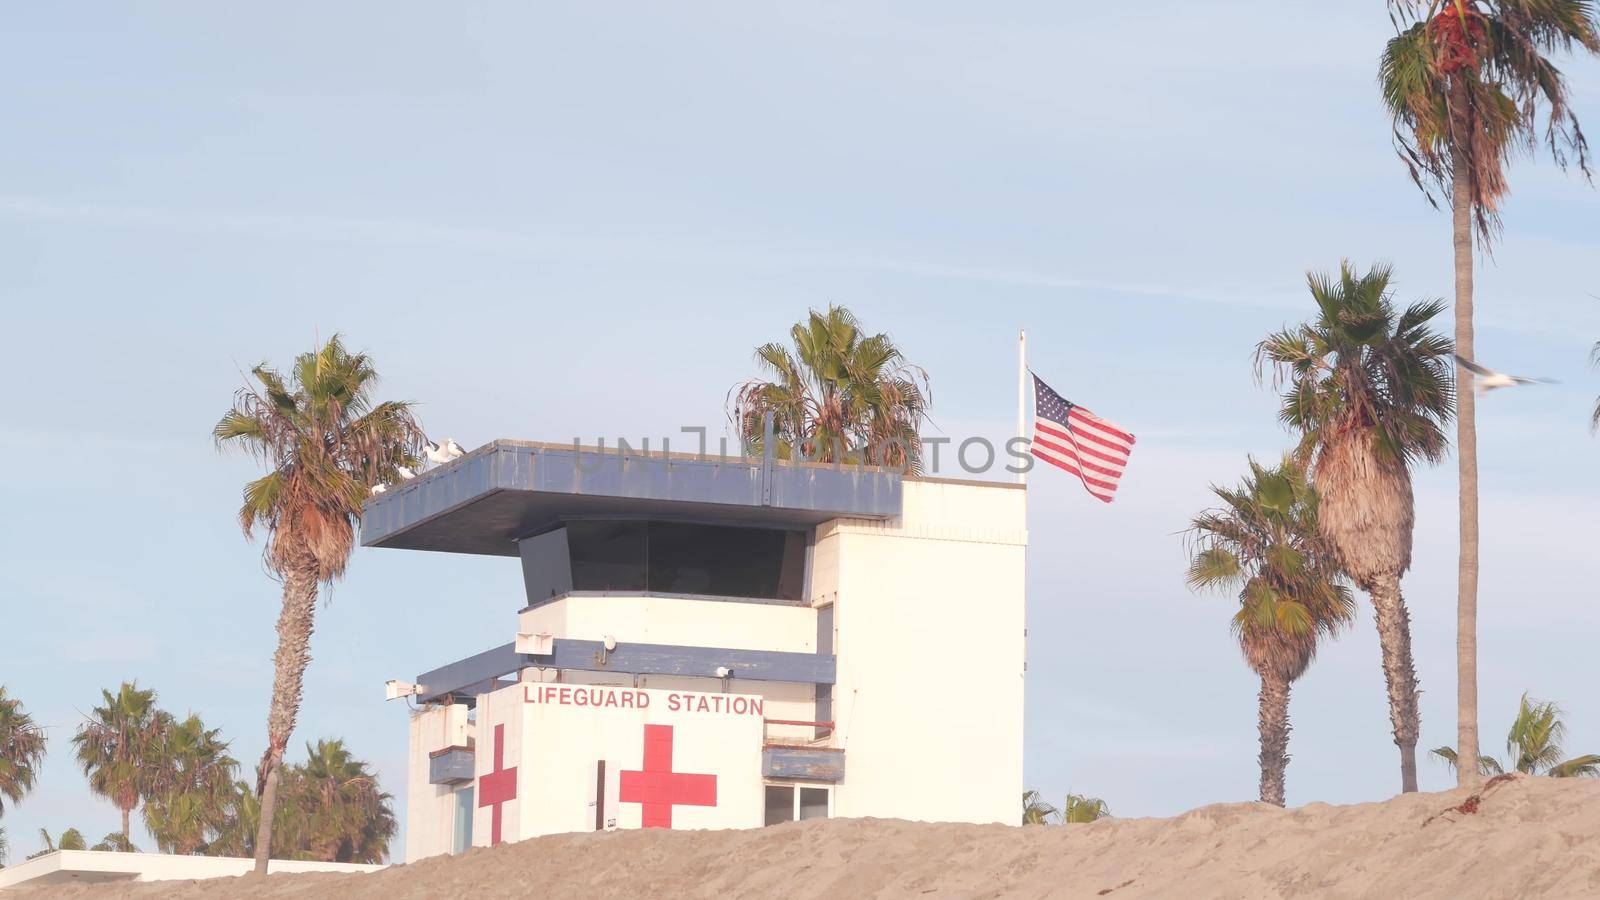 Lifeguard stand, tower or station, surfing safety, California beach, palm trees. by DogoraSun